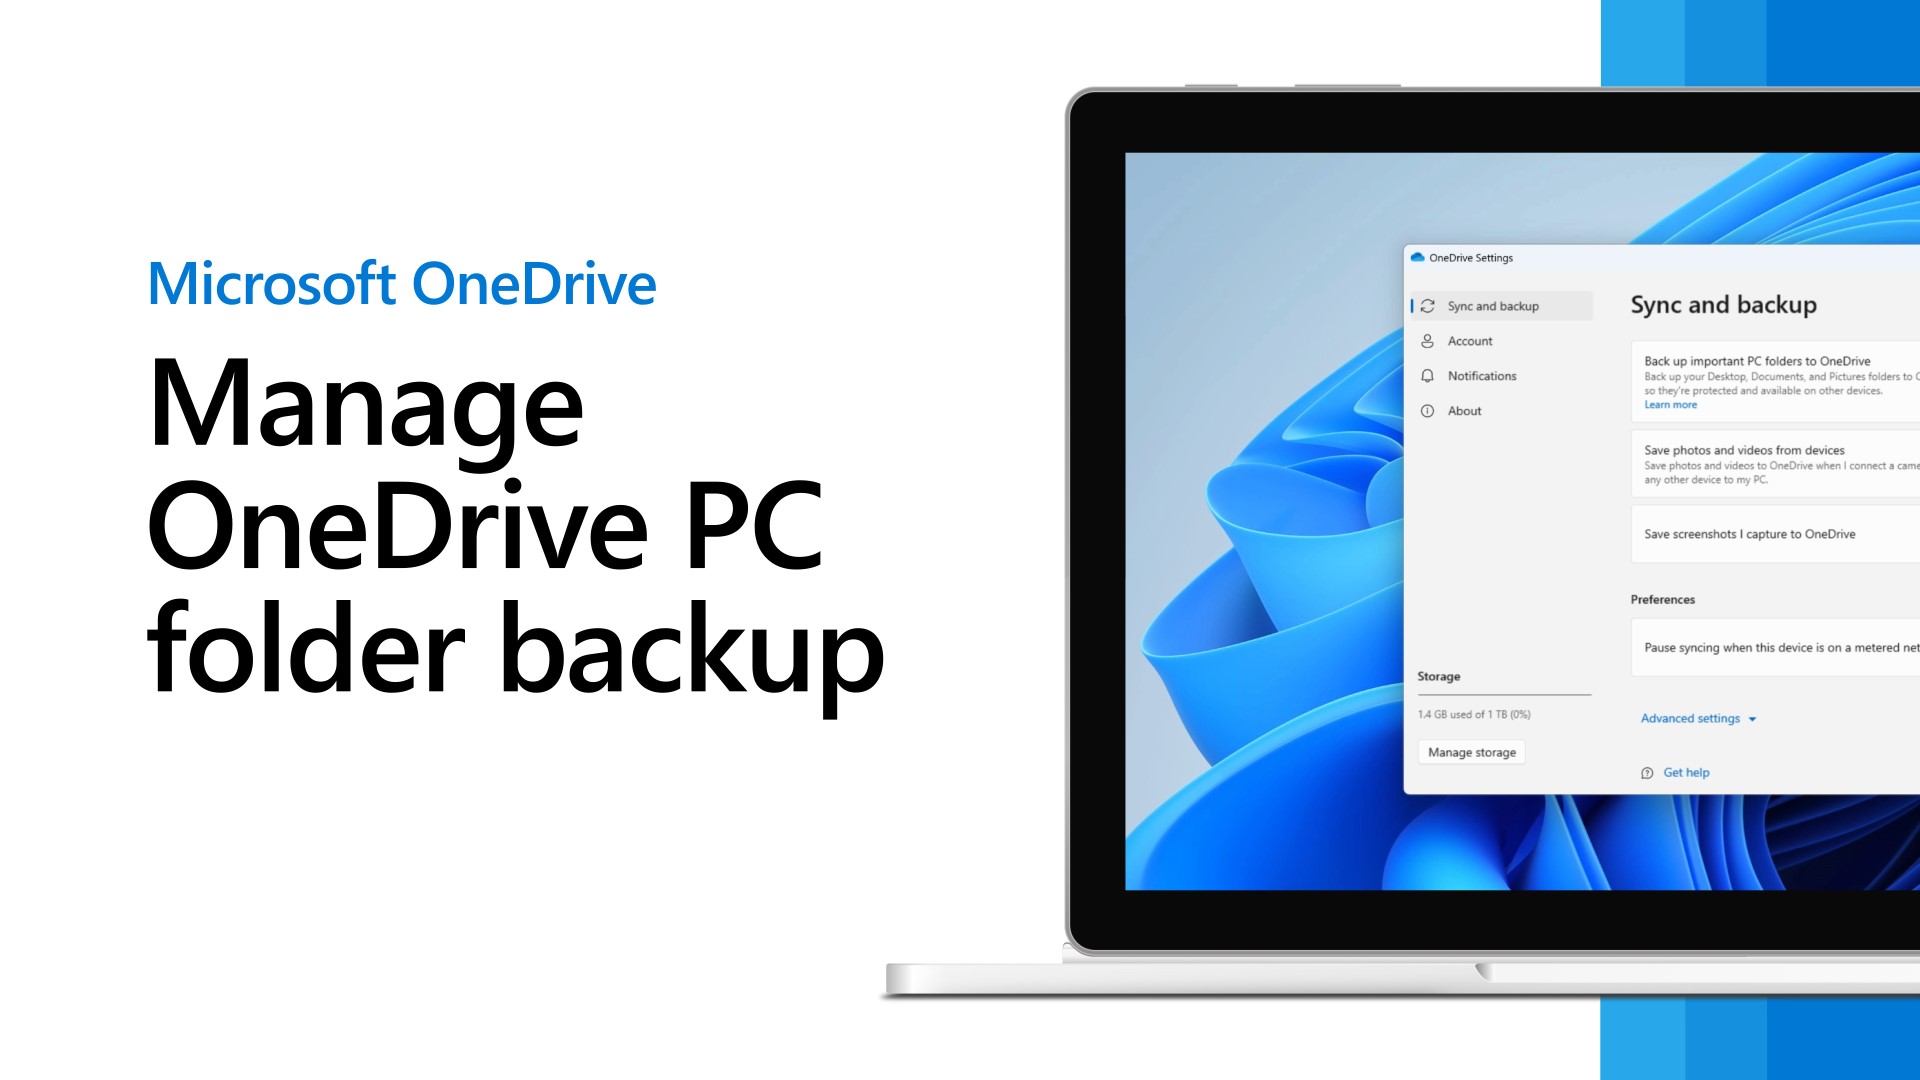 Can I backup my entire computer to OneDrive?